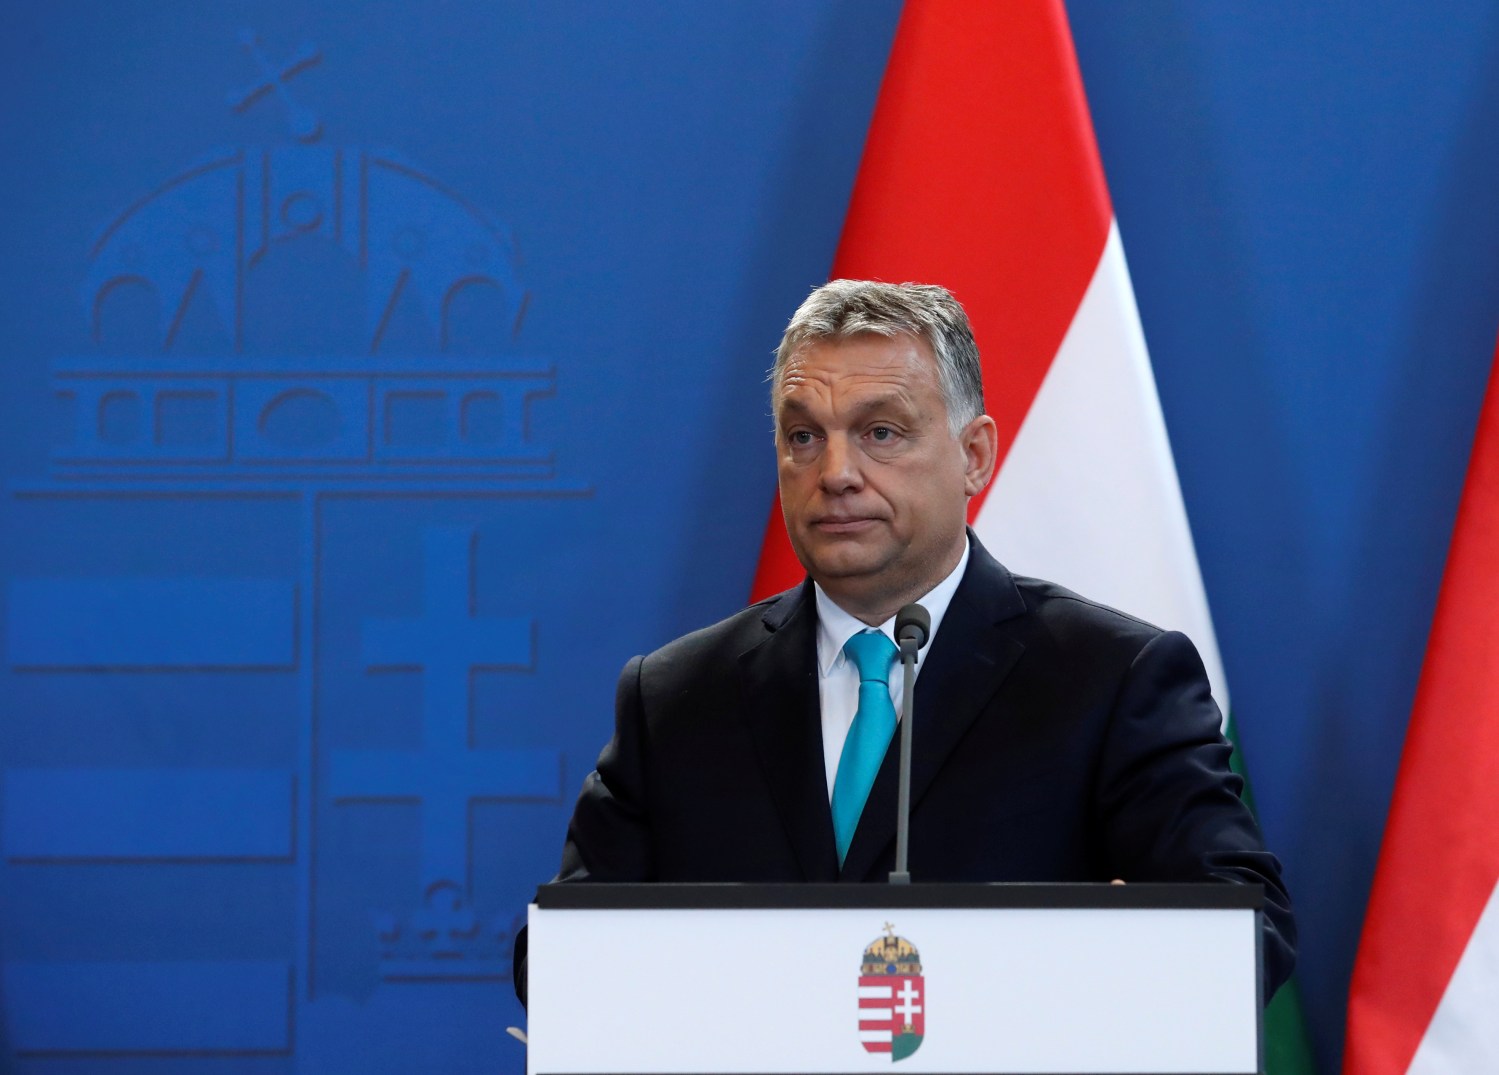 Hungarian Prime Minister Viktor Orban and Columbian President Juan Manuel Santos (not pictured) give a statement to the media in Budapest, Hungary, May 11, 2018. REUTERS/Bernadett Szabo